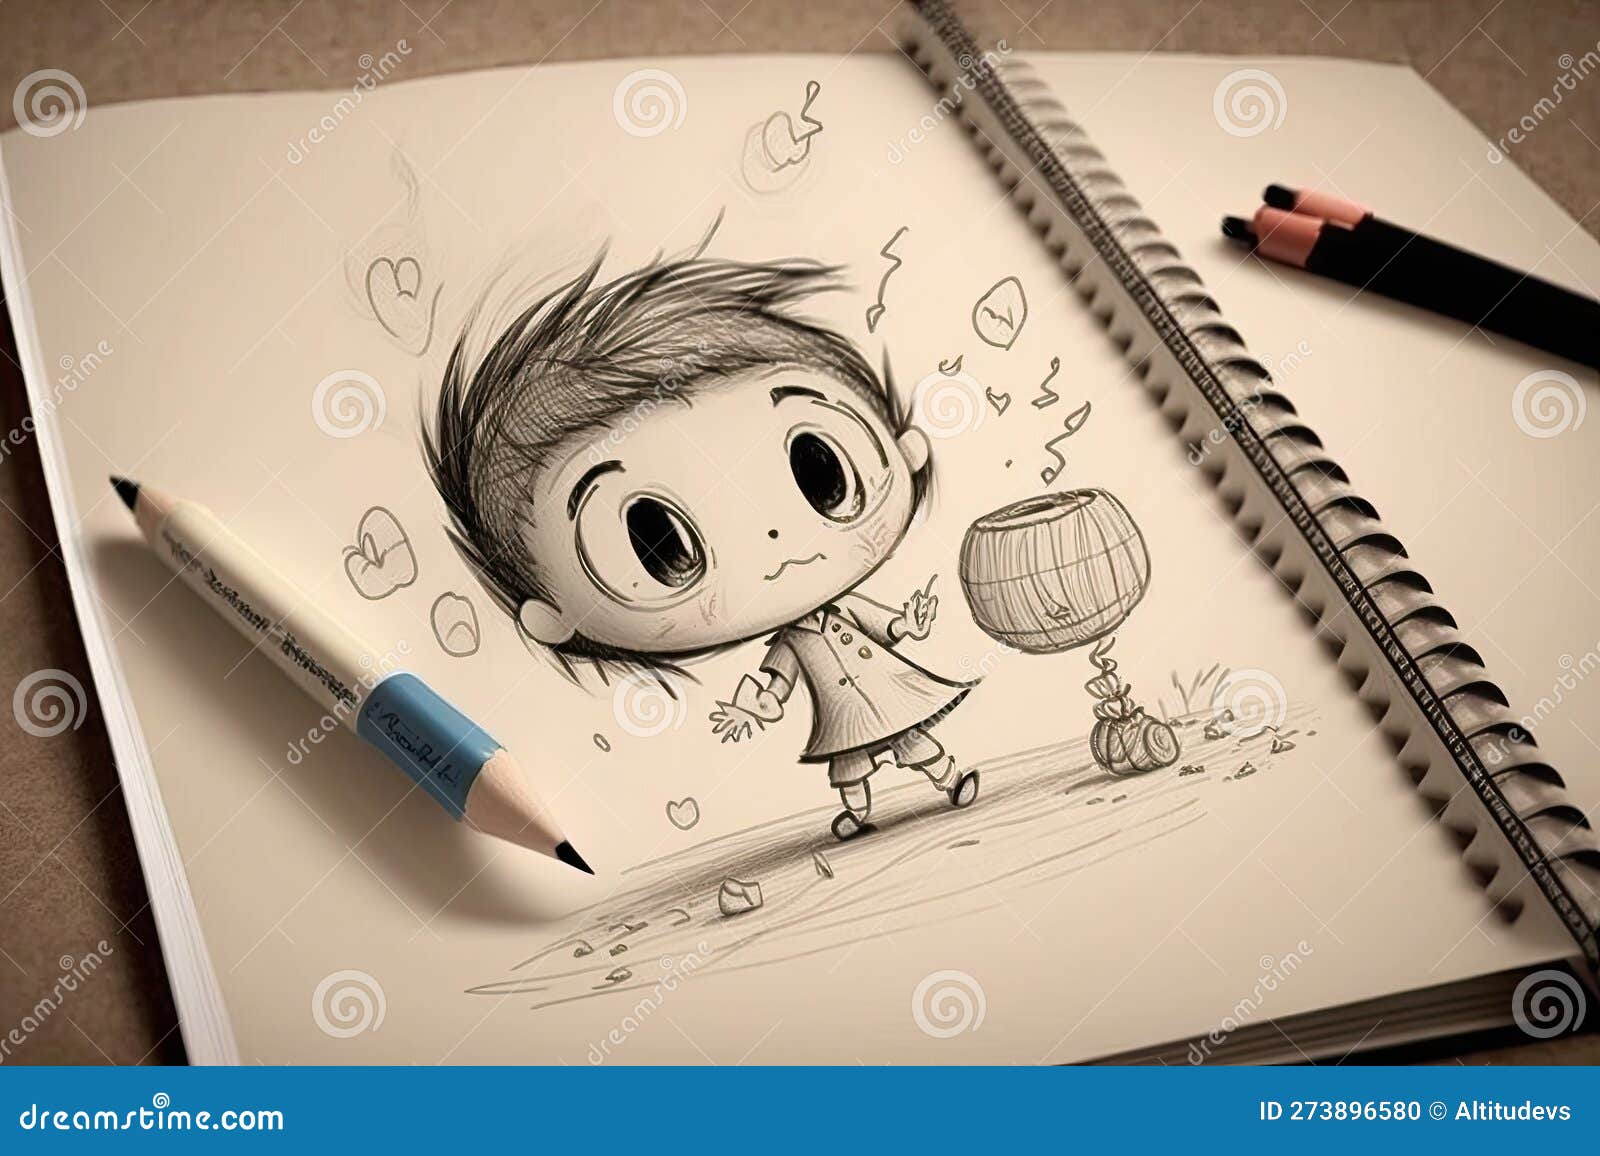 How To Draw Cartoon Characters | Fun Video Drawing Tutorials – Quickdraw